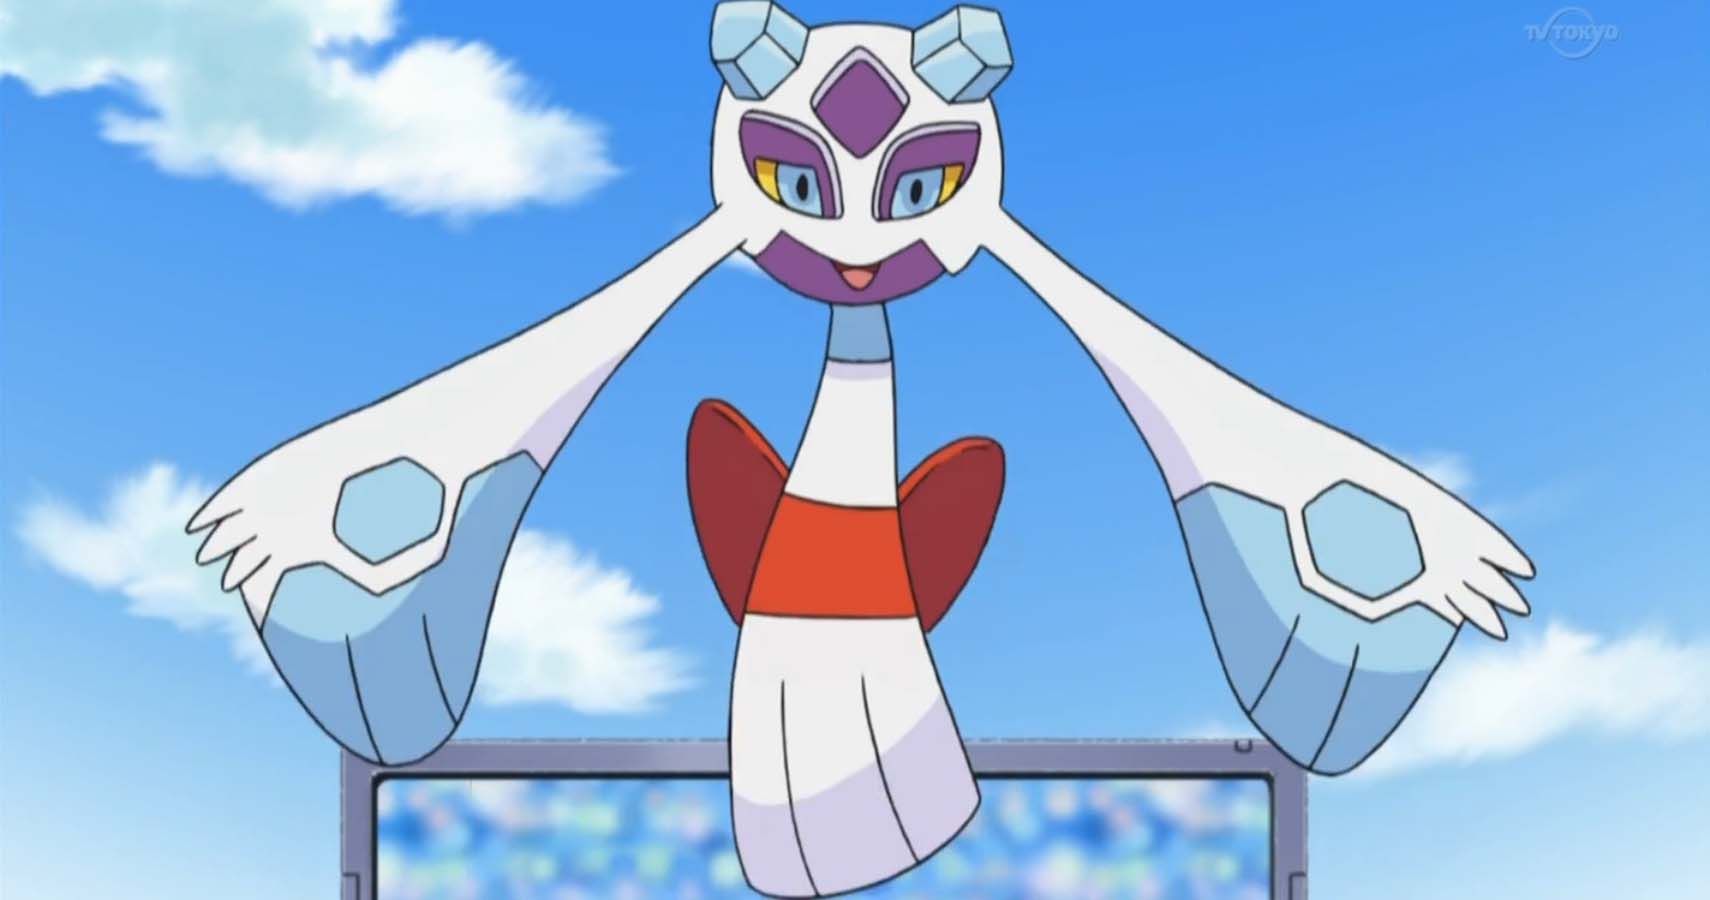 Frolass in the Pokemon anime